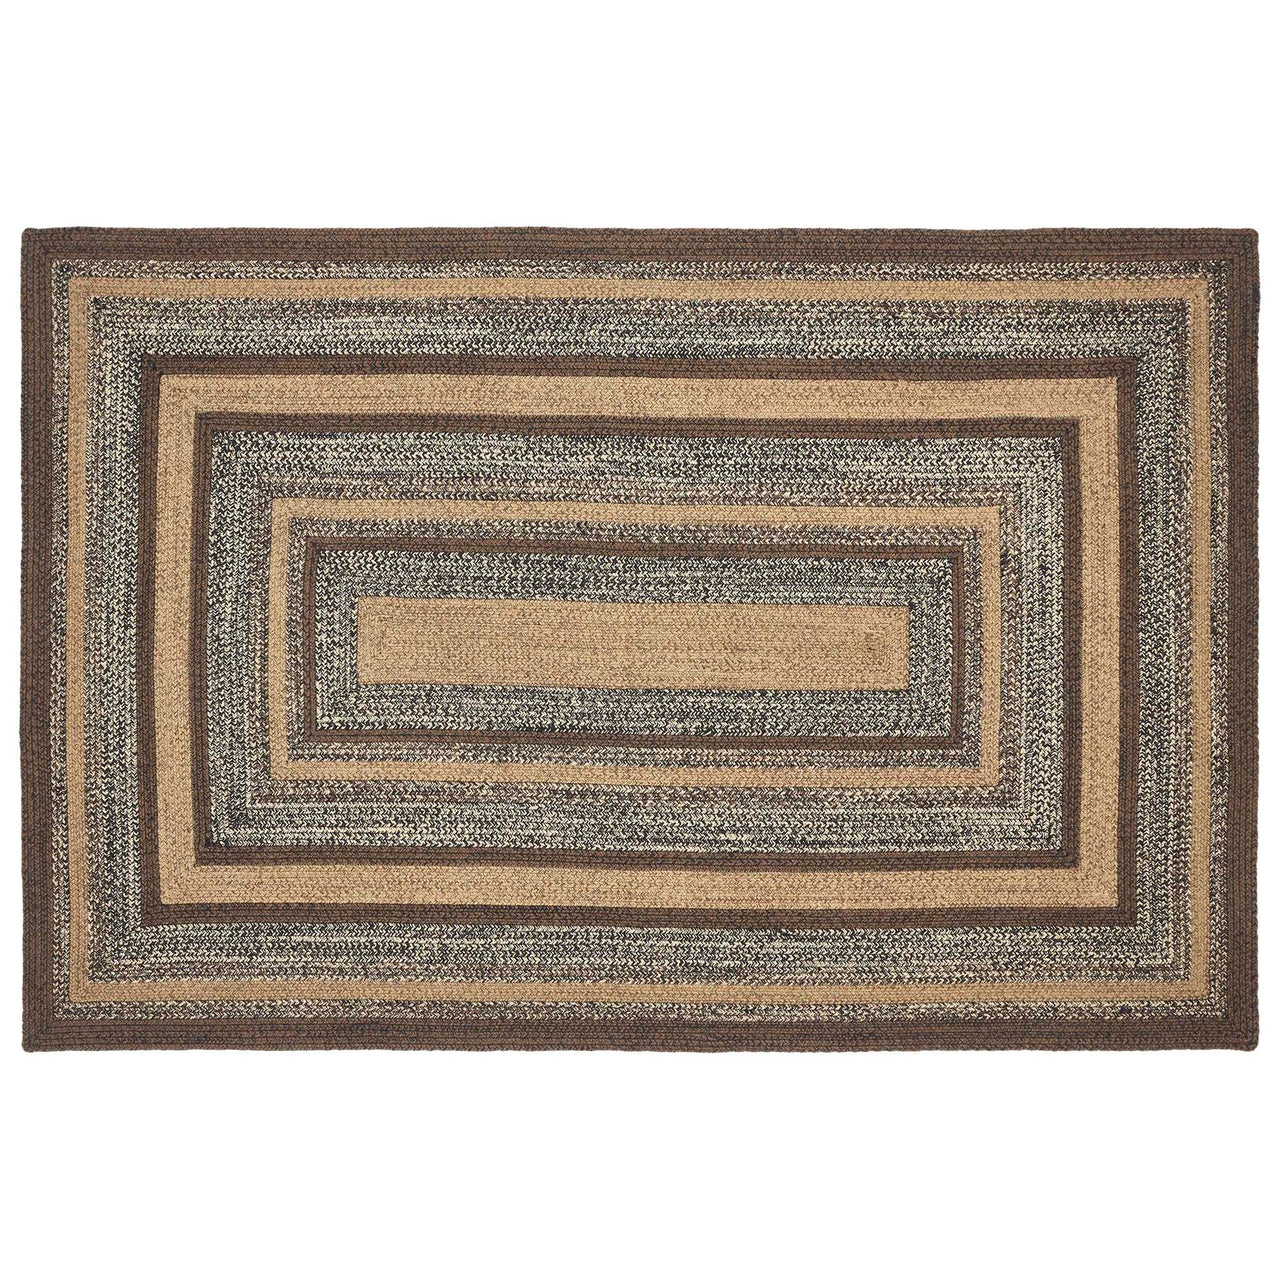 Espresso Jute Braided Rug Rect with Rug Pad 5'x8' VHC Brands